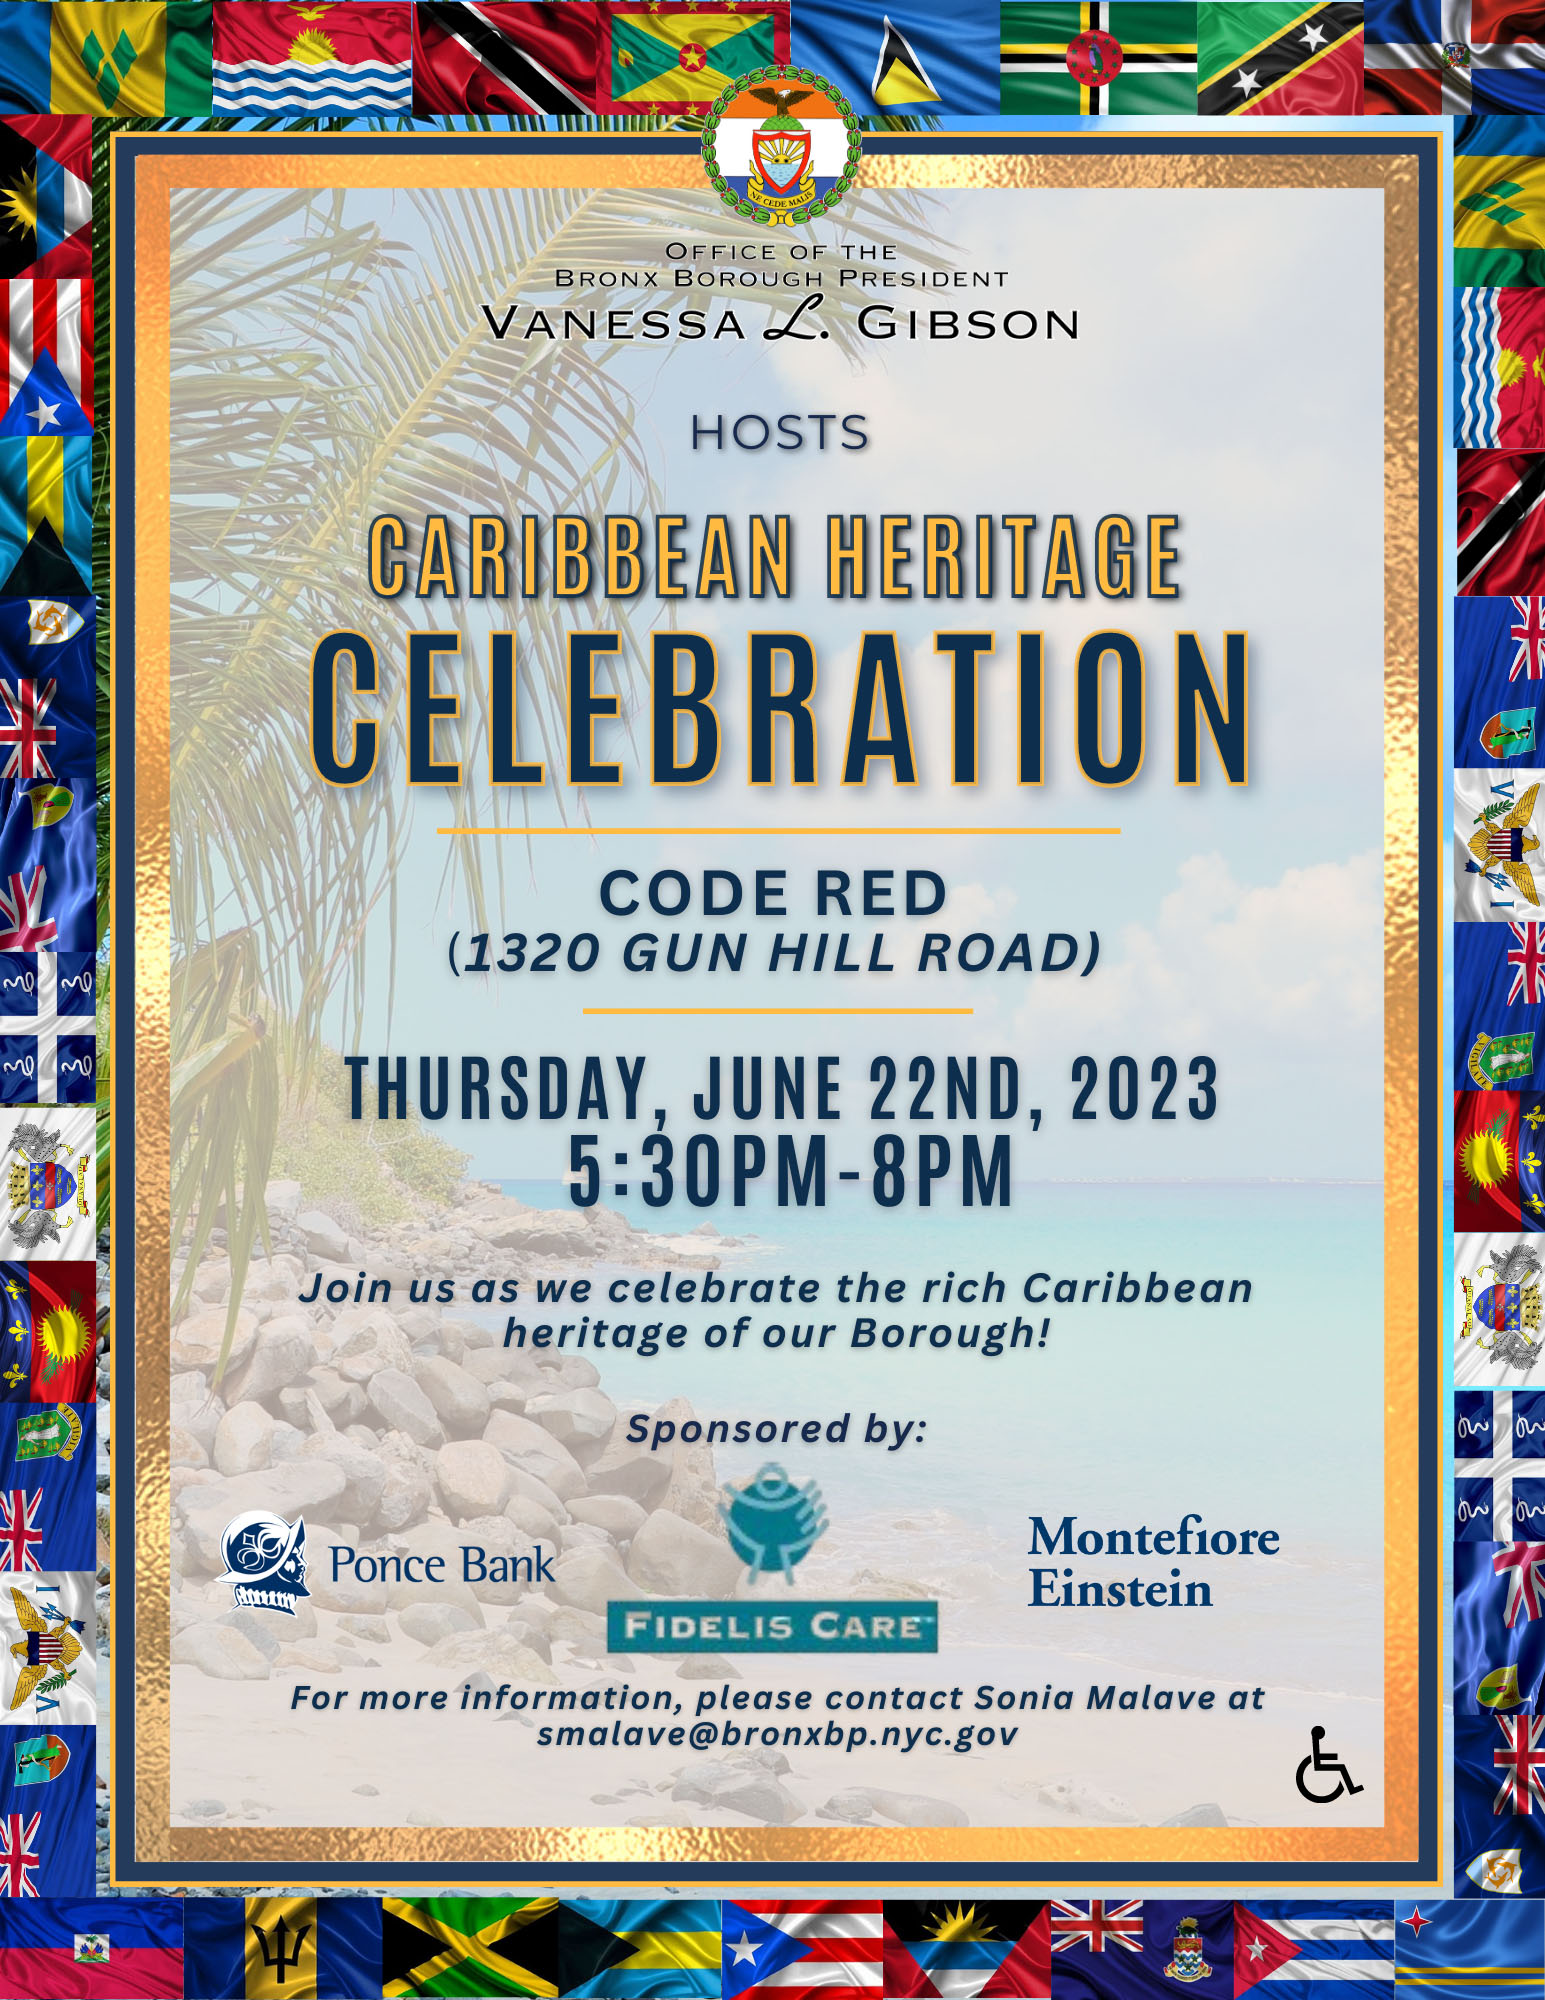 A flyer for BP Gibson's Caribbean Heritage event on June 22, 2023.